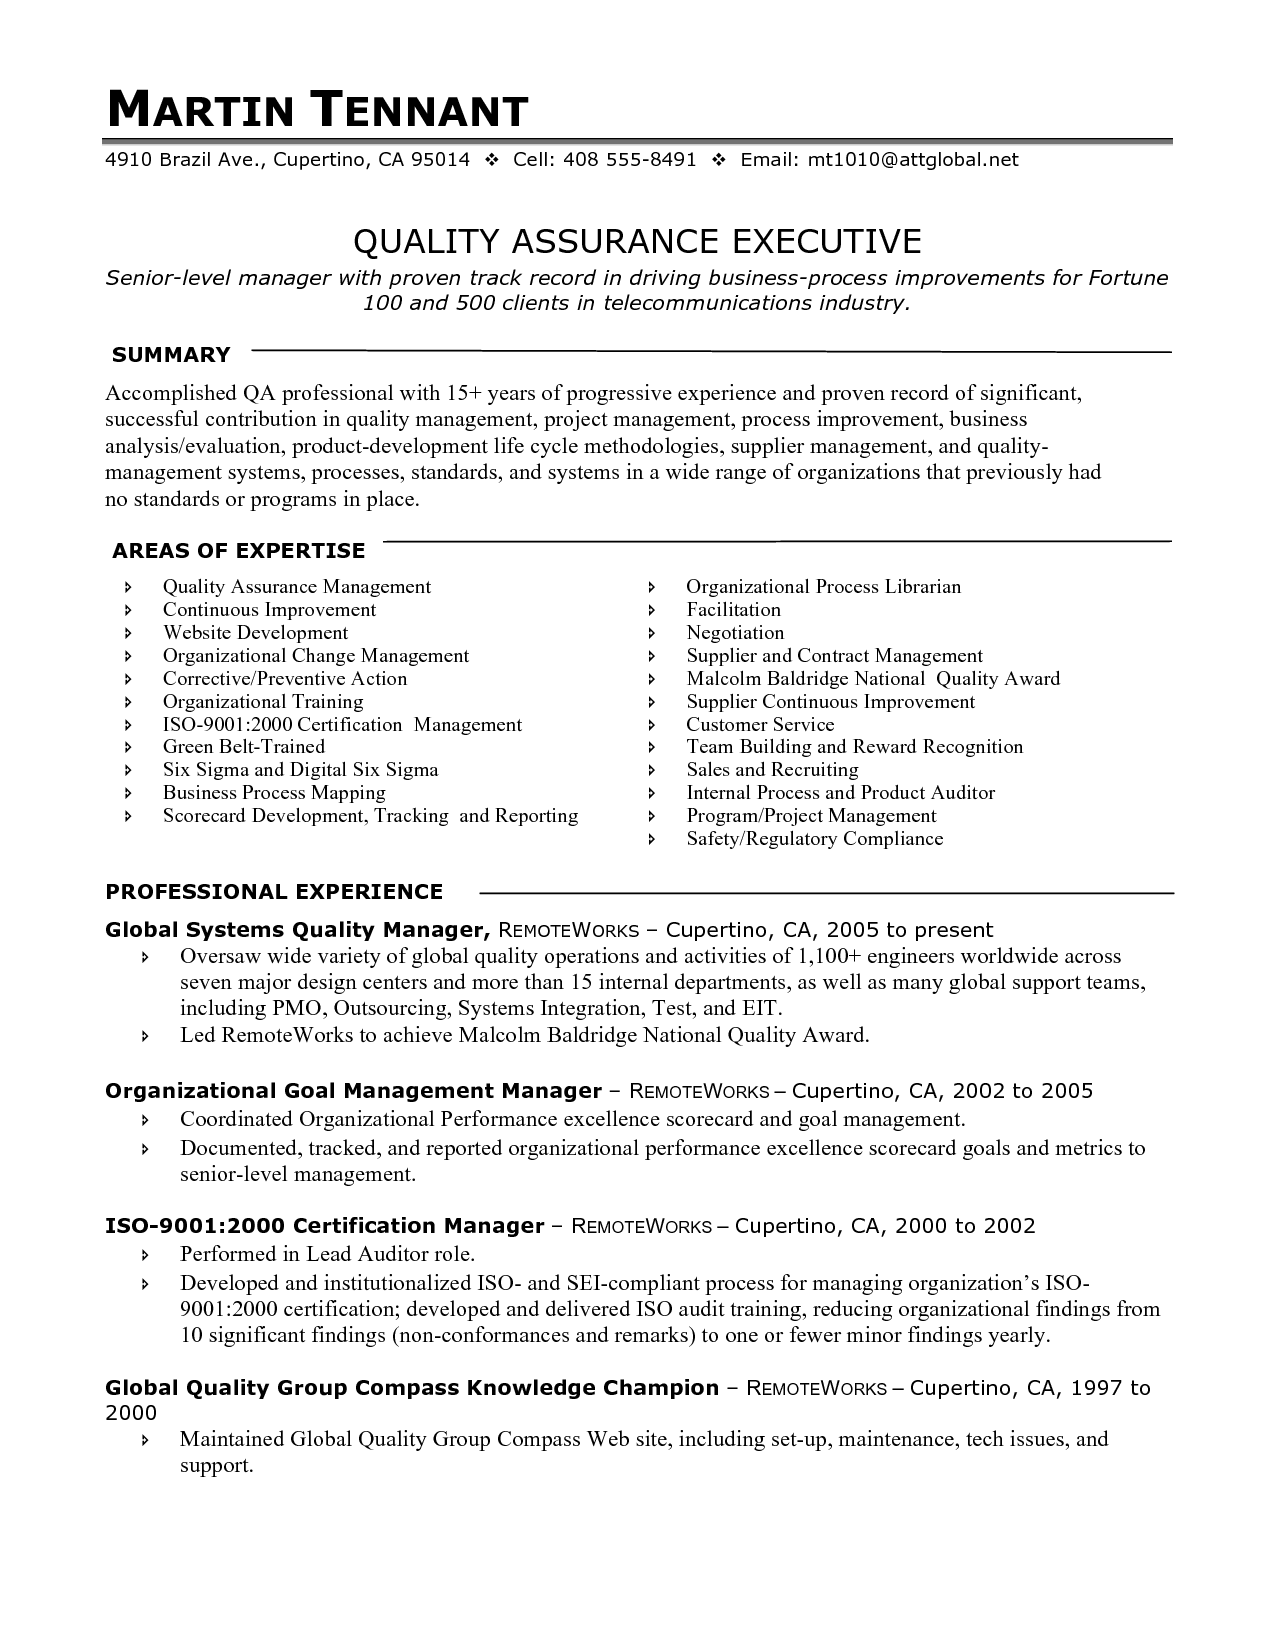 Quality Assurance Manager Resume